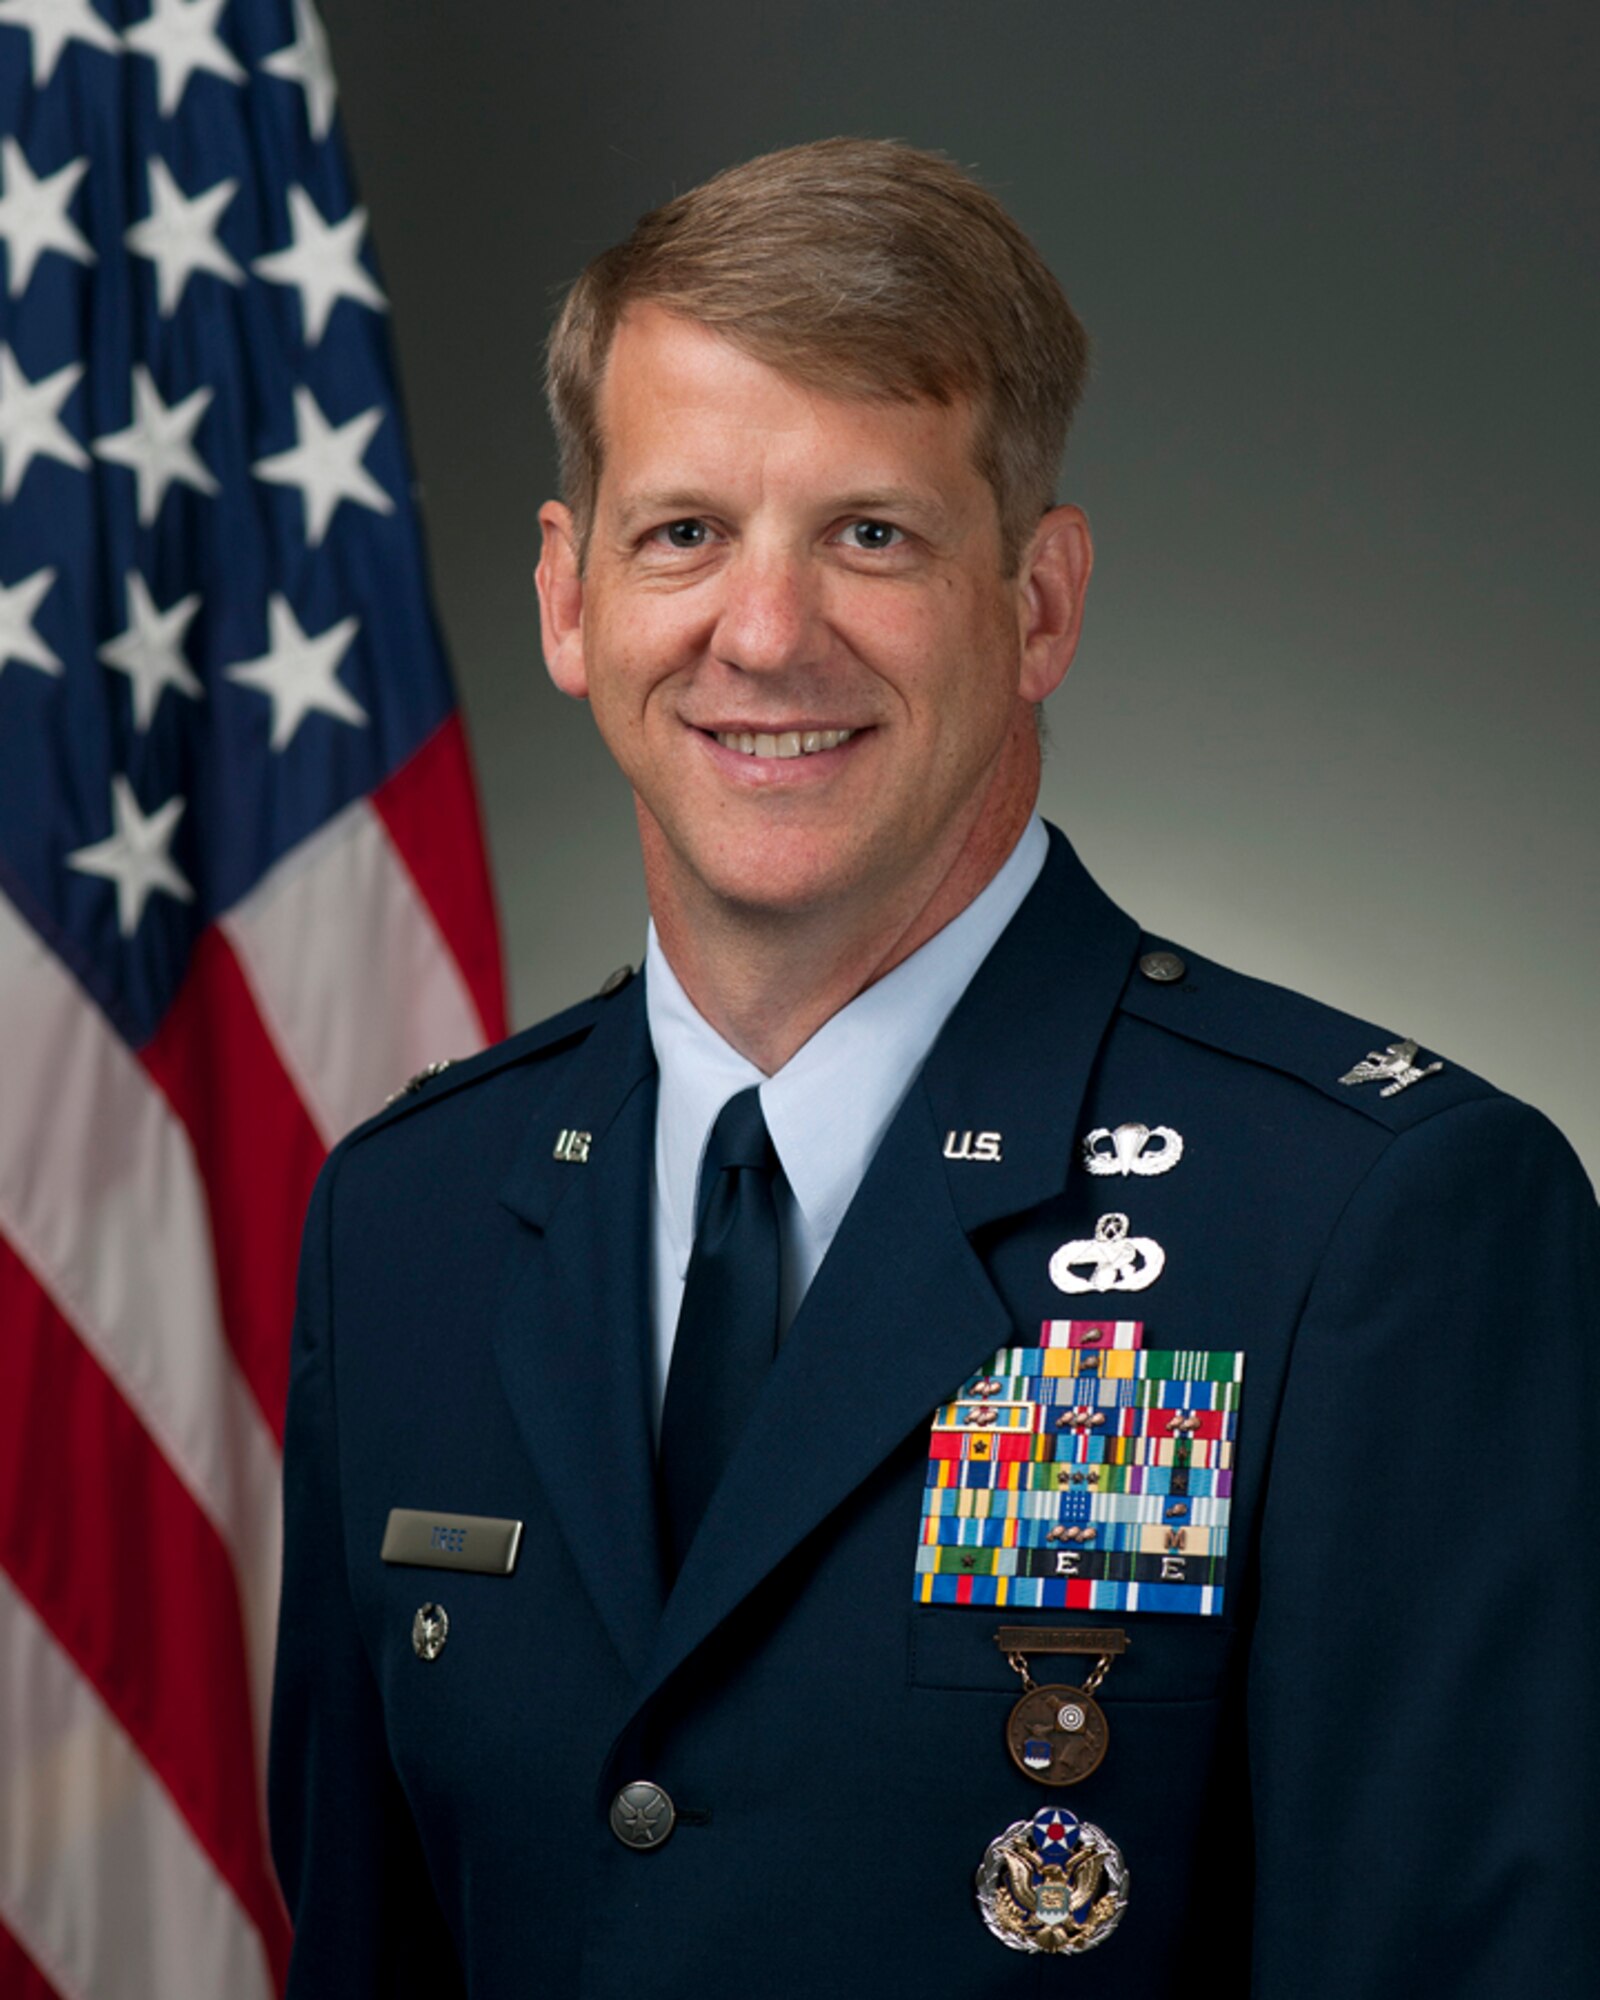 As a colonel in the Air Force Reserve, Tree serves as the senior Reservist to the director of resource integration at the Pentagon.